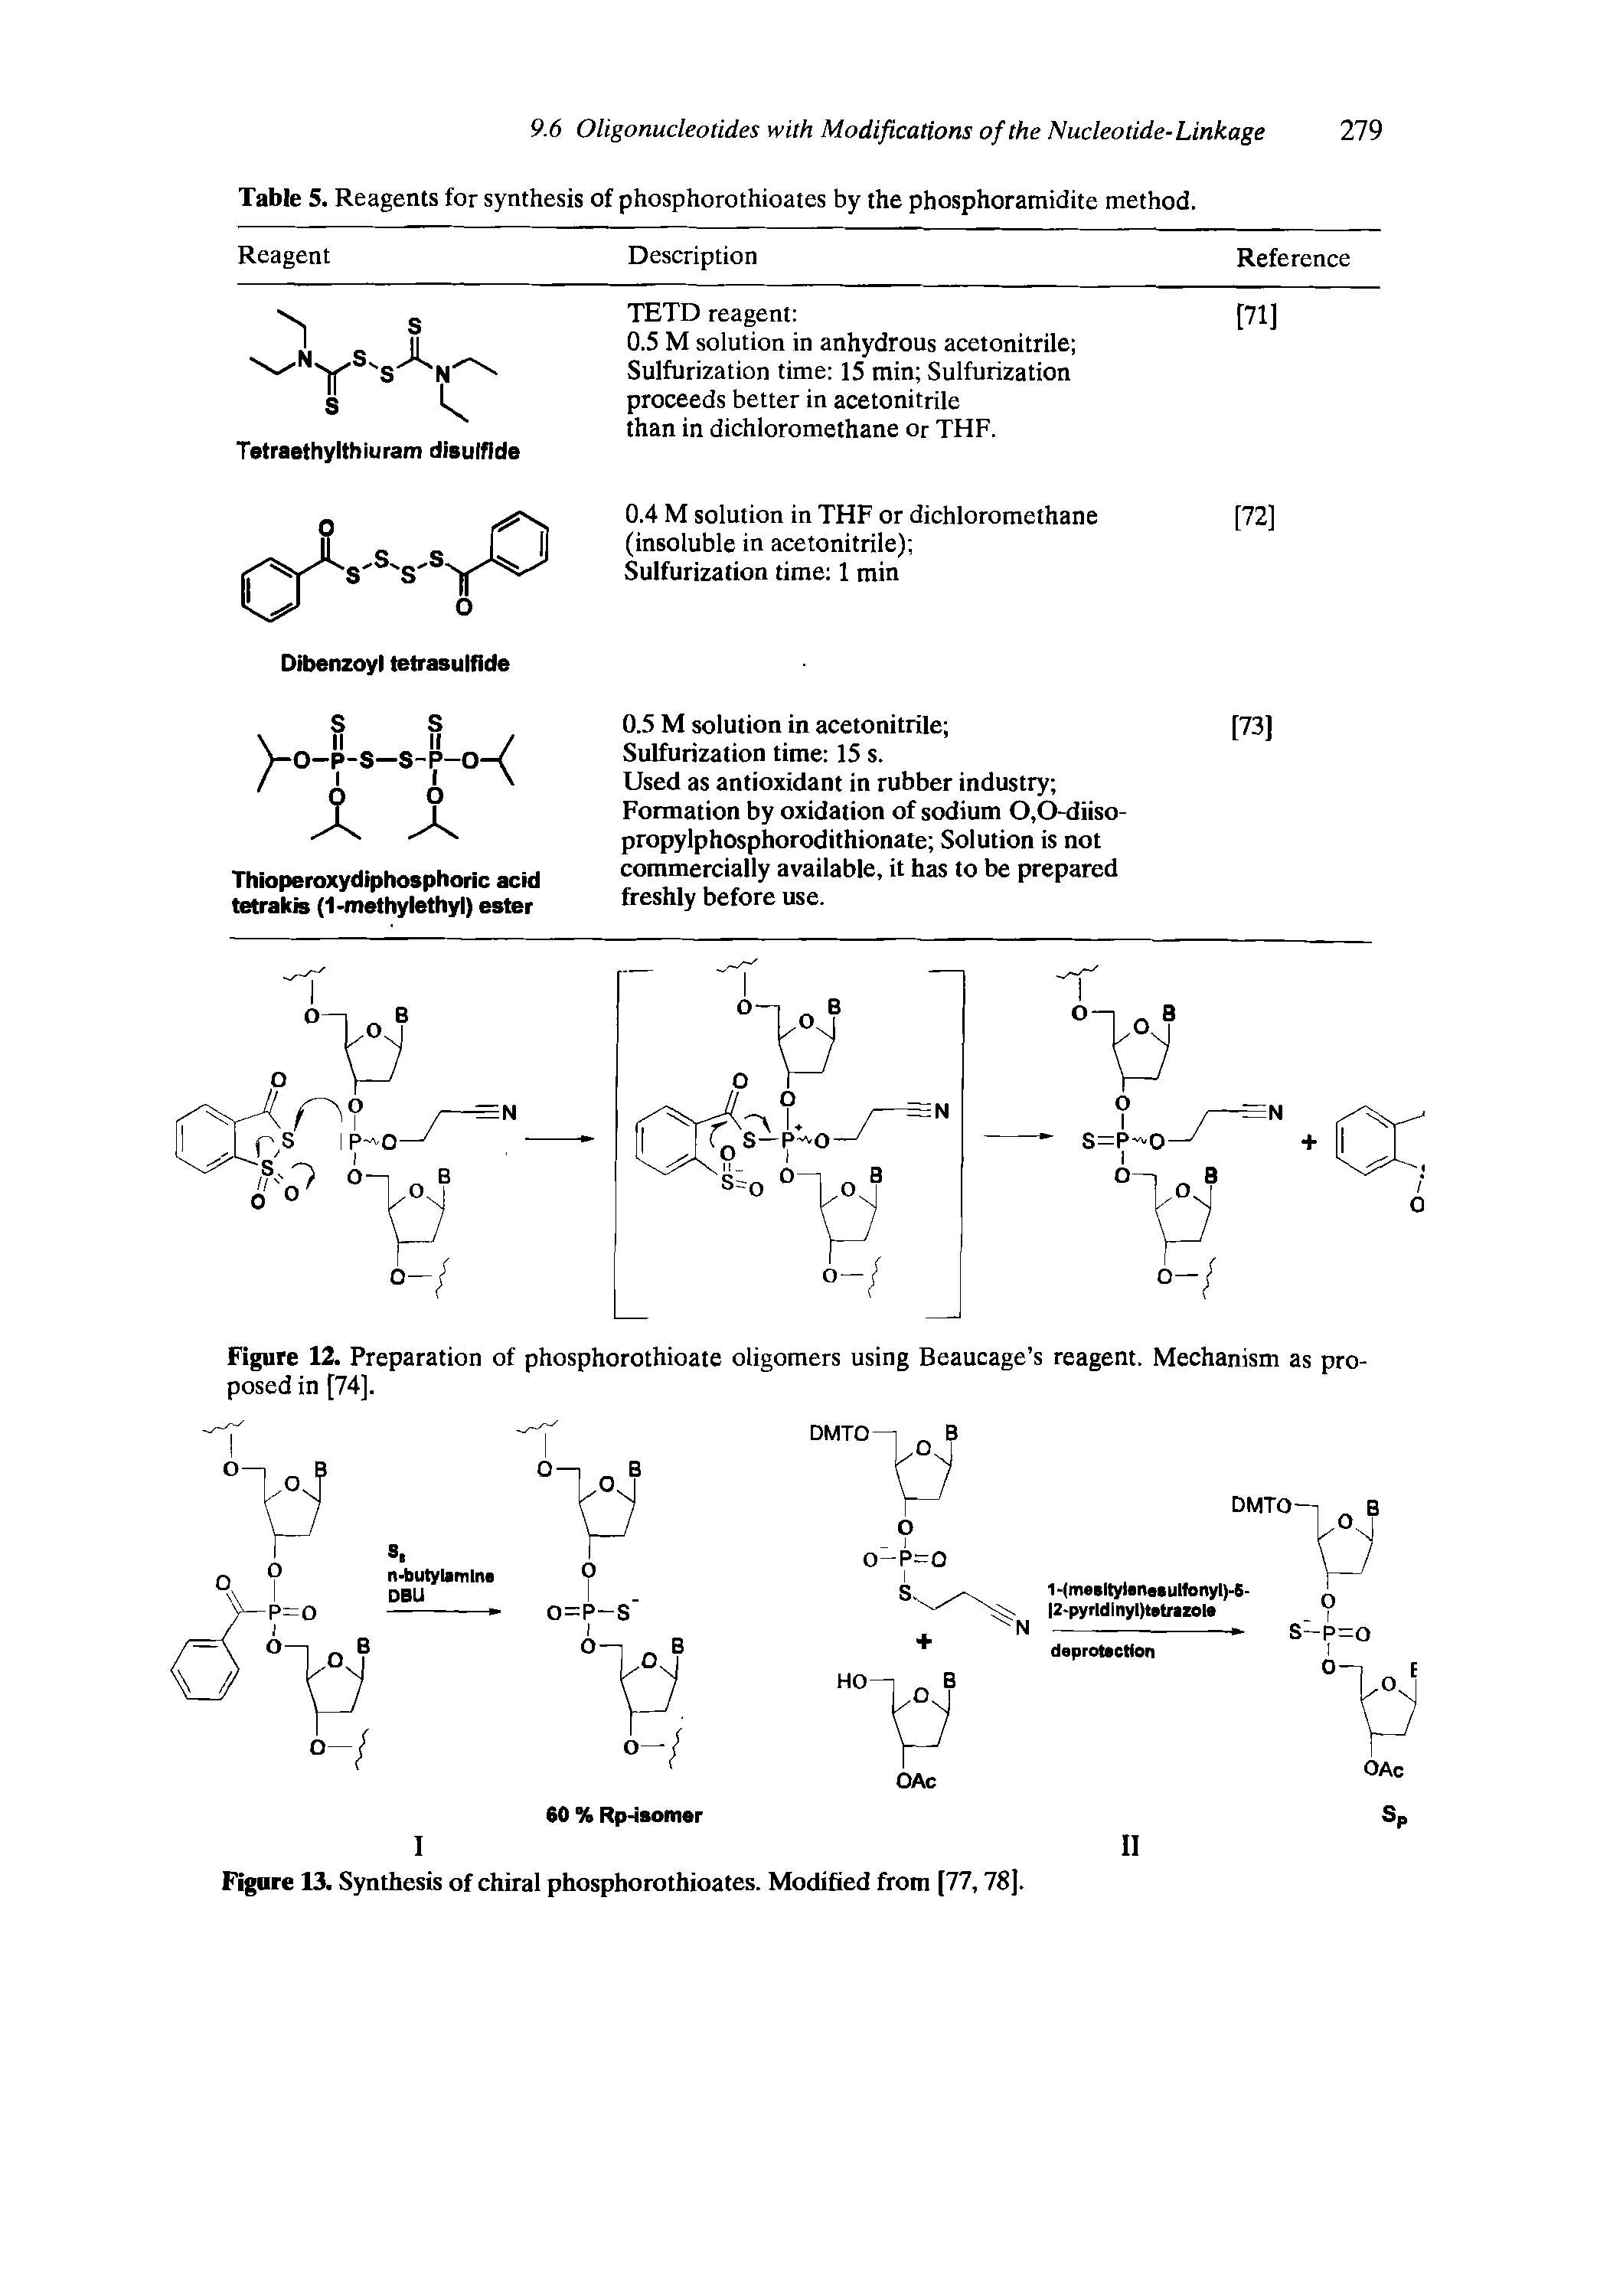 Figure 13. Synthesis of chiral phosphorothioates. Modified from [77,78].